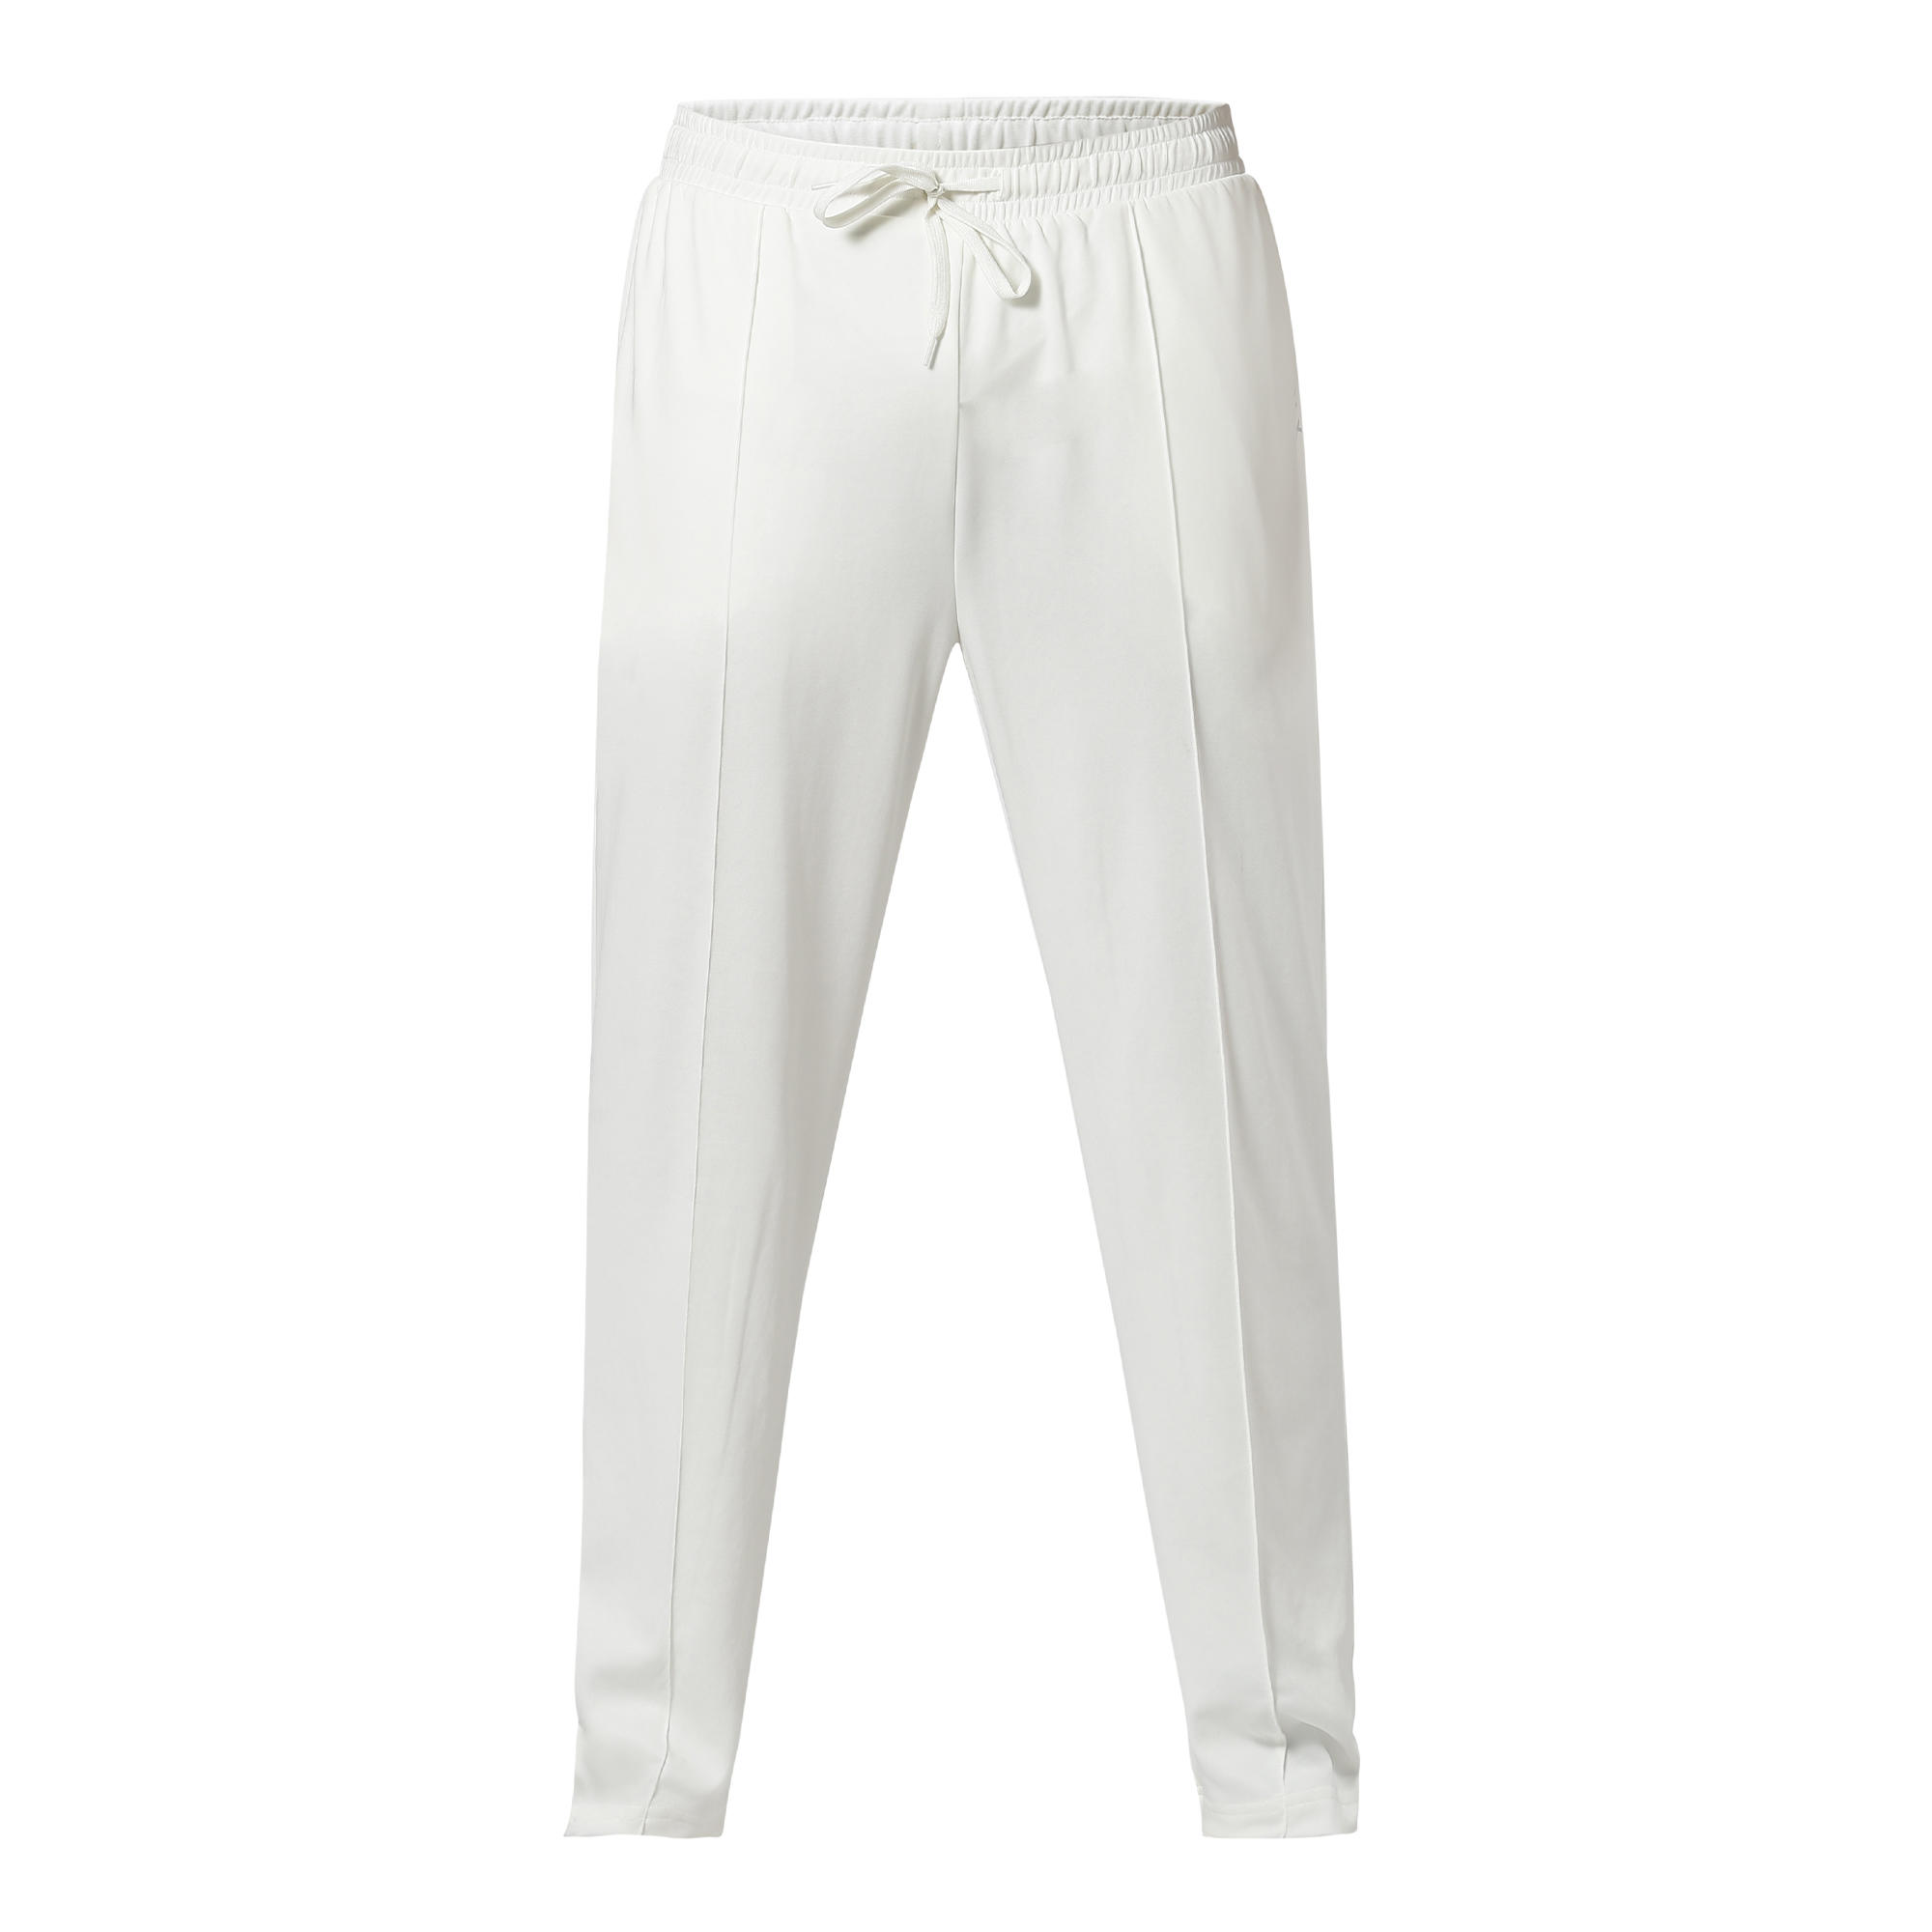 Cricket Track Pants Online Shopping  JW Cricket Whites Trousers